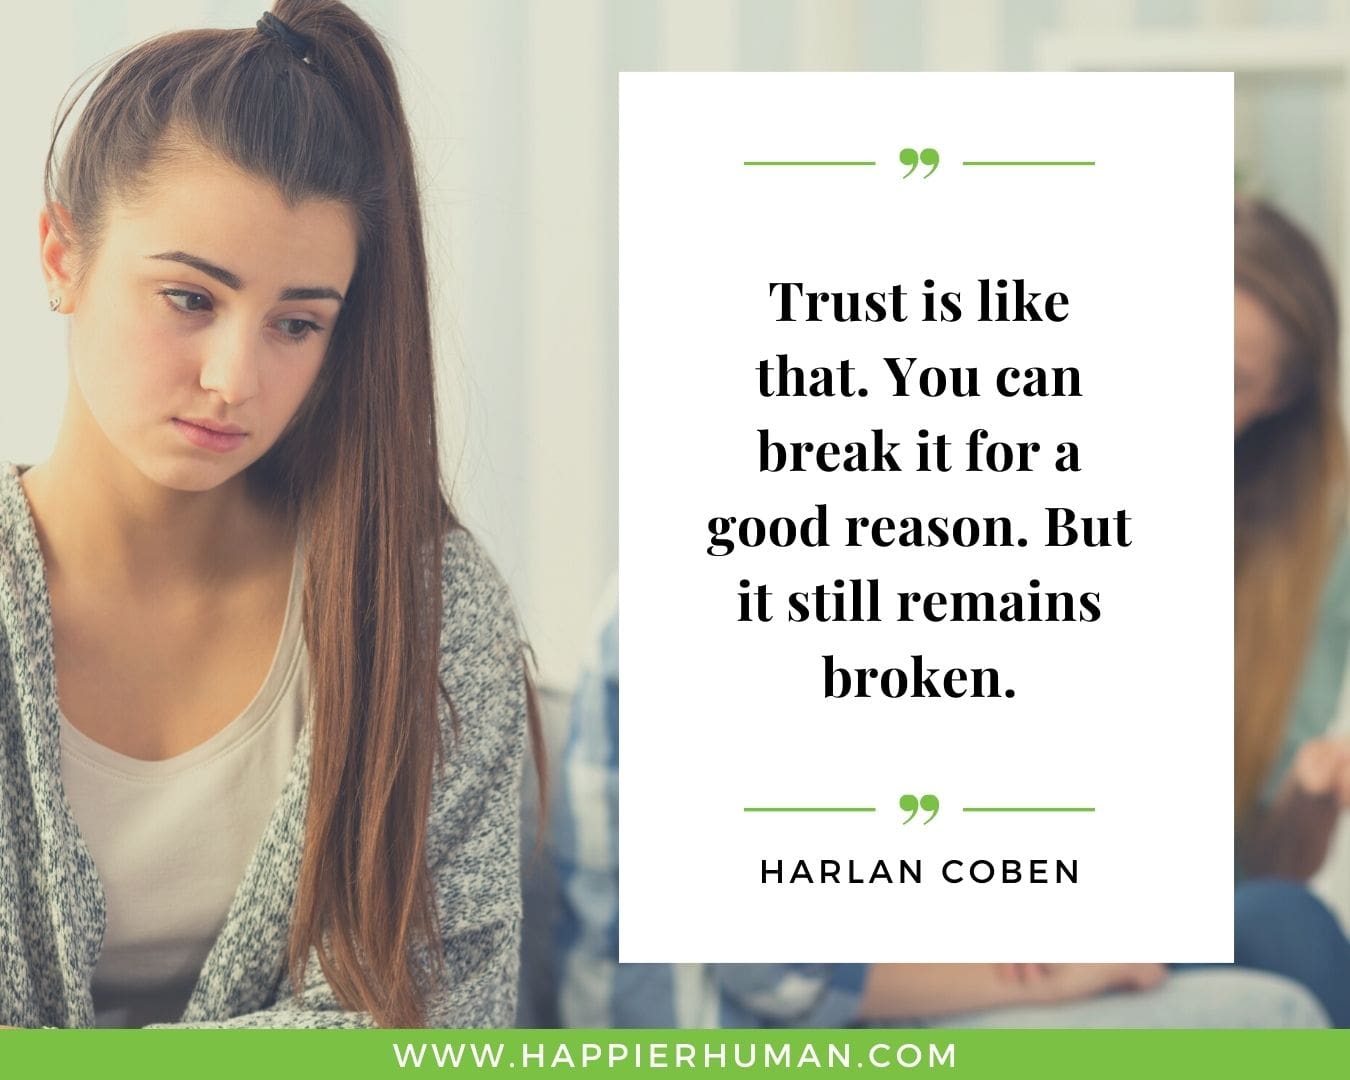 Broken Trust Quotes - “Trust is like that. You can break it for a good reason. But it still remains broken.” - Harlan Coben